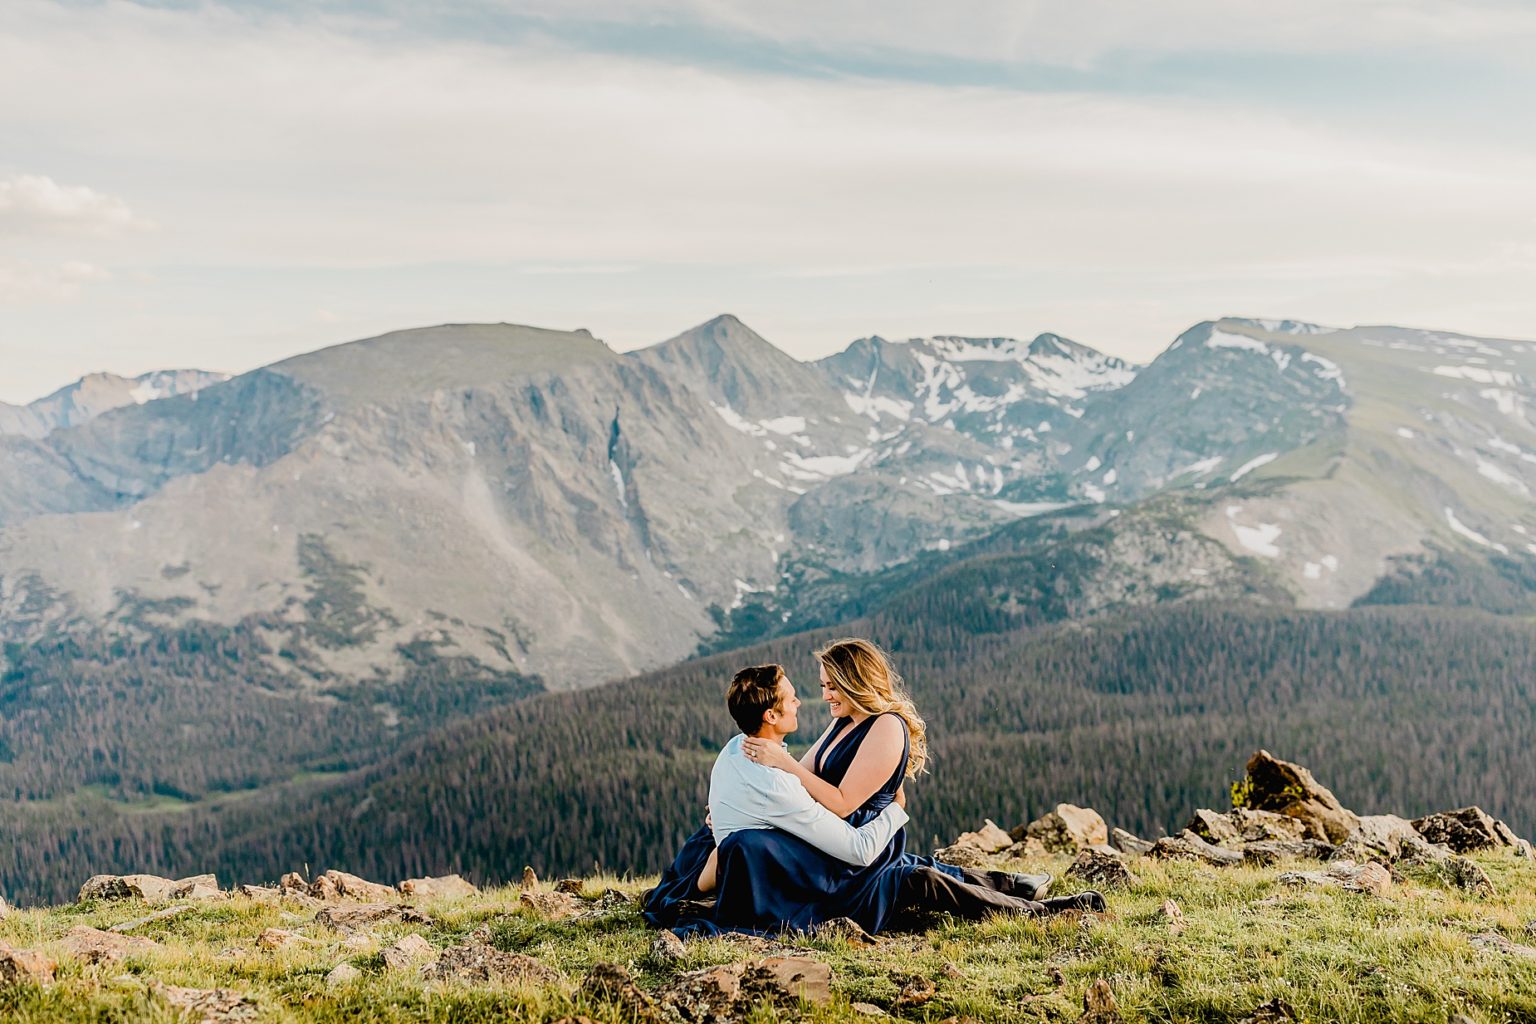 man and woman sit in the grass overlooking mountain backdrop with beautiful colors